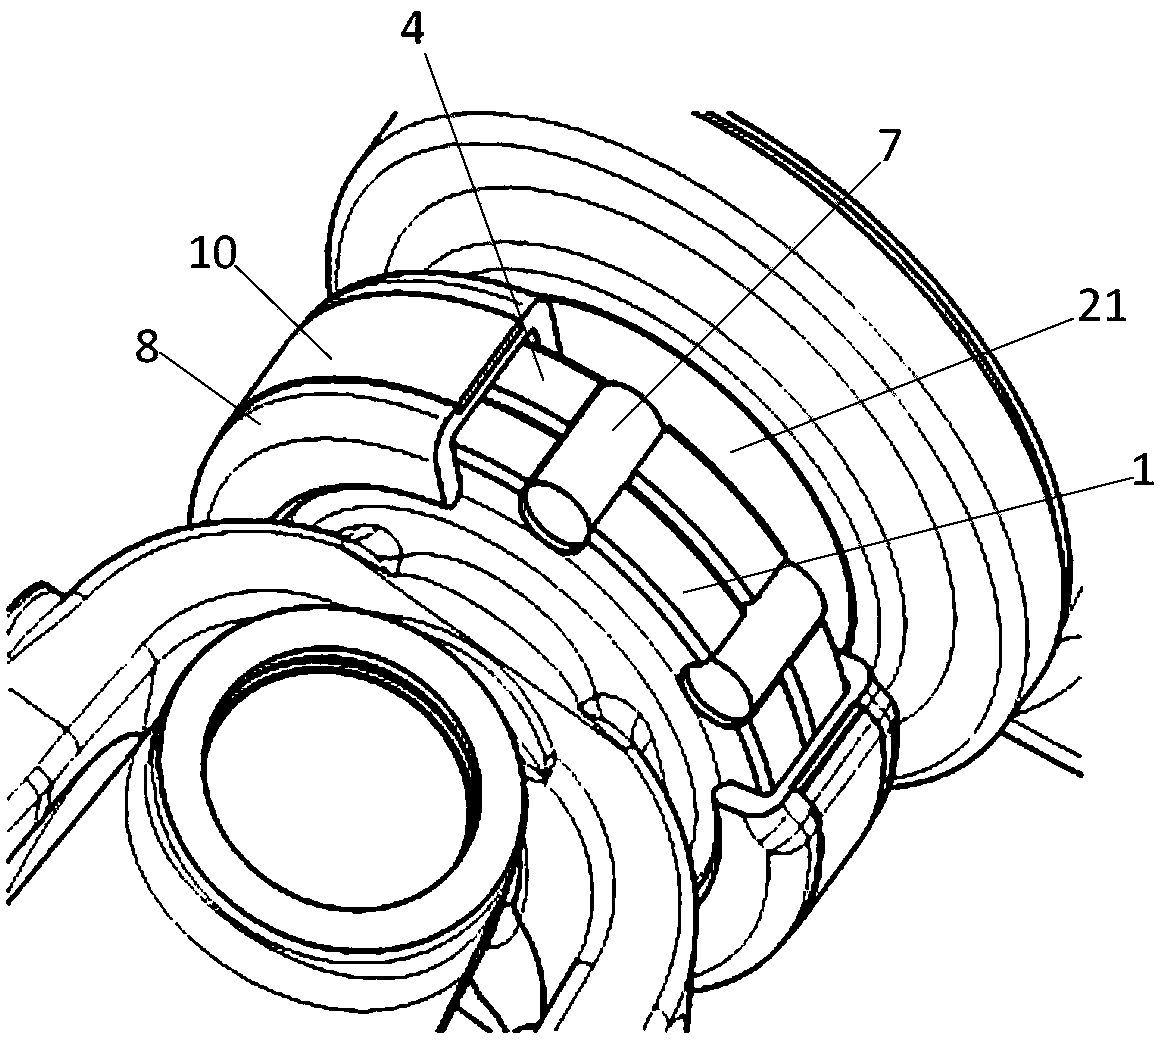 Connecting device for transmission shaft and input shaft